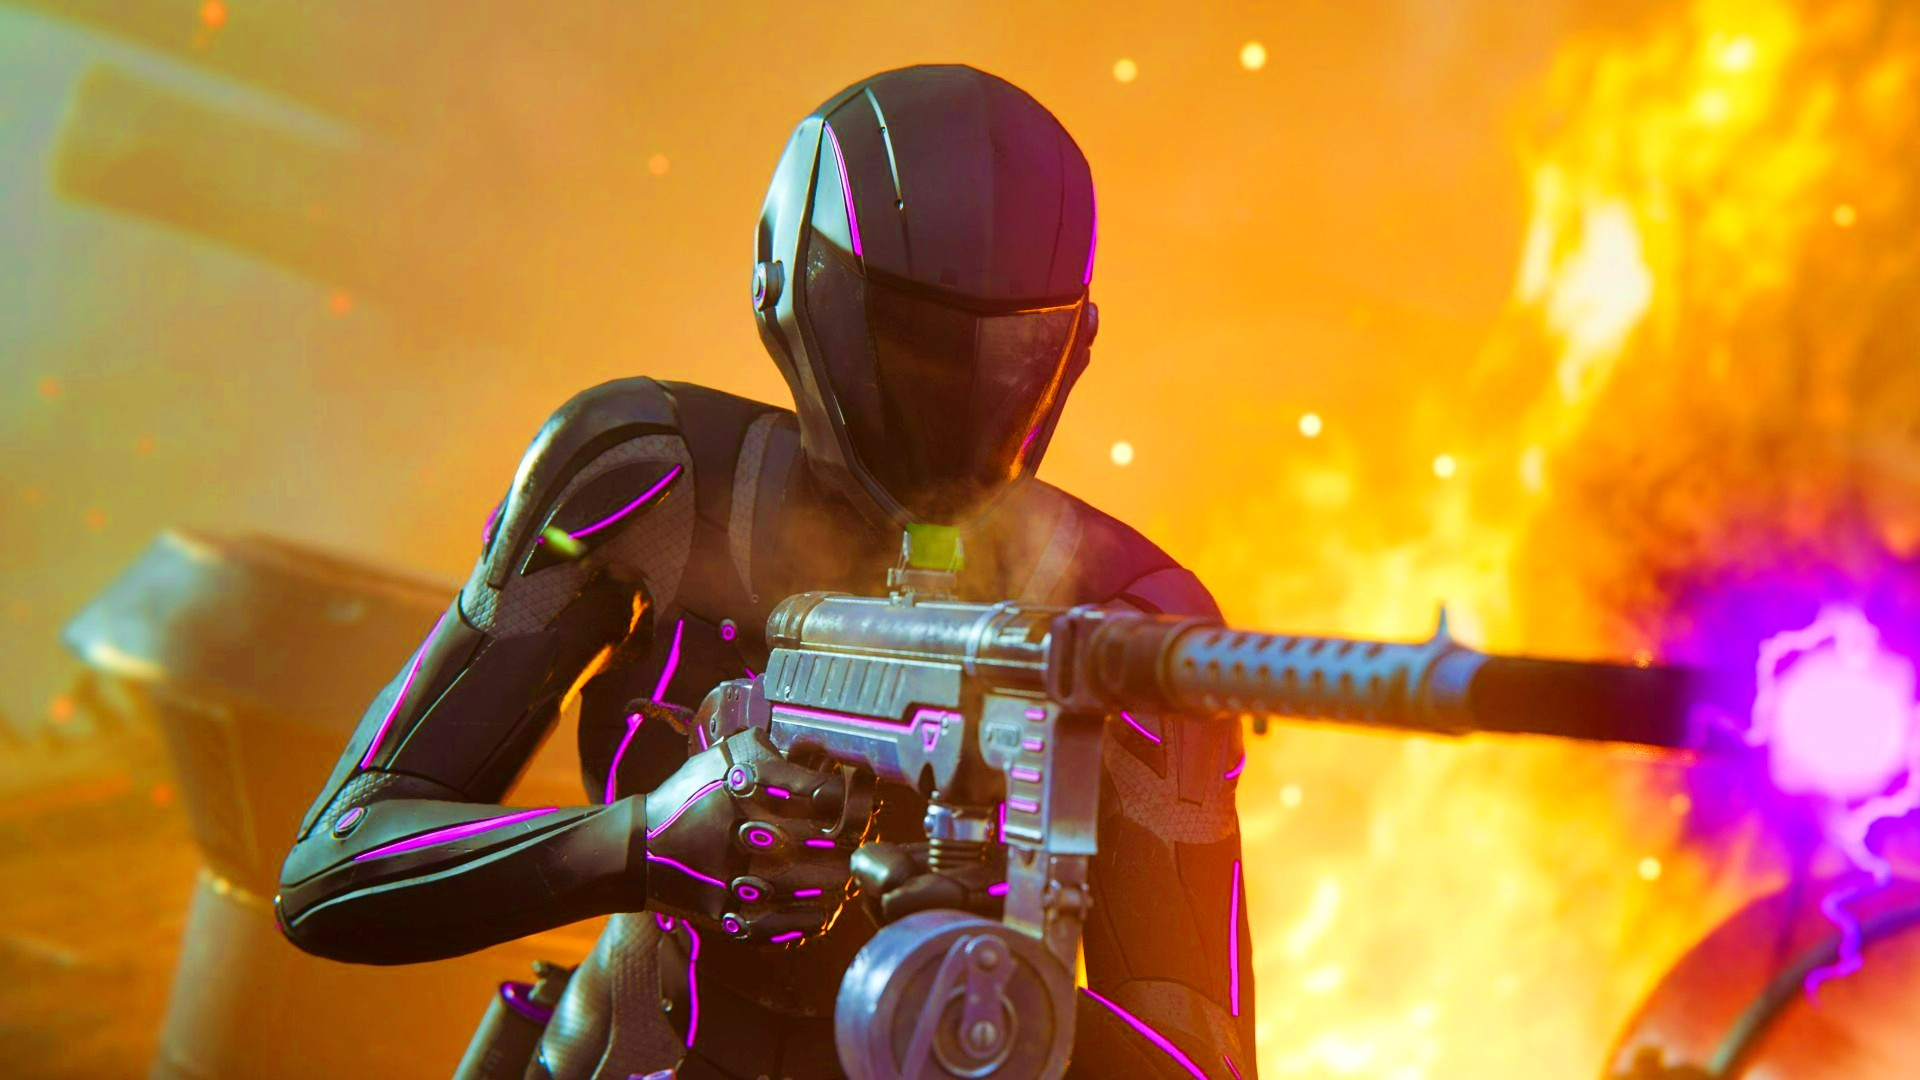 Call of Duty: Warzone's Roze skin is now invisible in the day as well